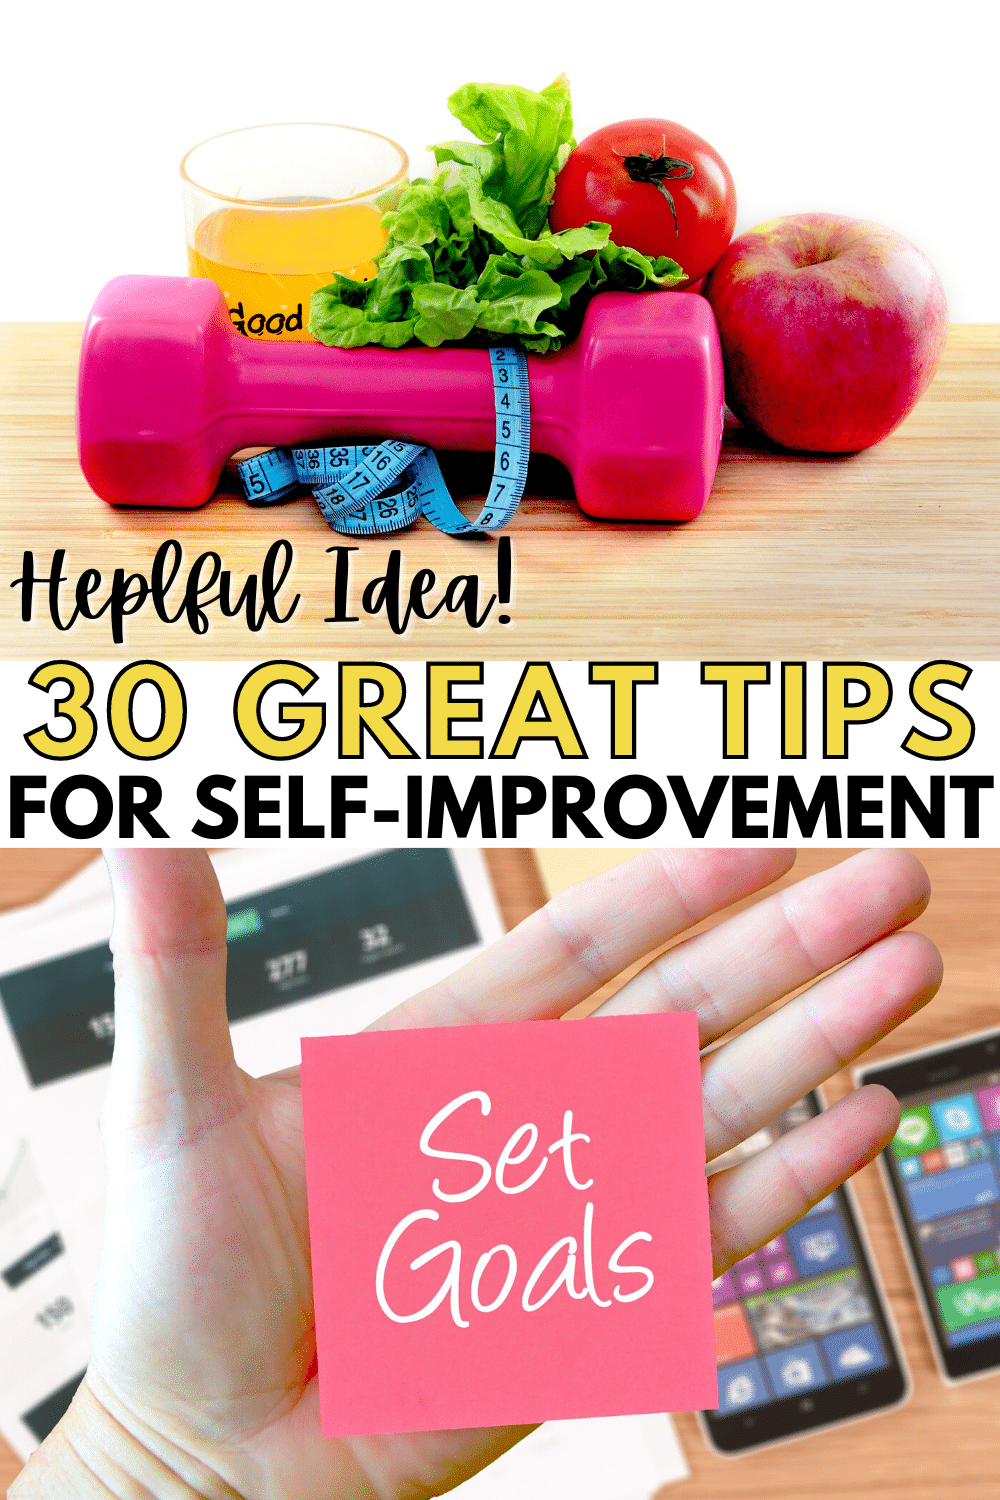 Everyone wants to be the best they can be. By following these 30 self-improvement tips, they will help you be more focused, energetic, and balanced. #selfcare #selfimprovement #metime via @wondermomwannab